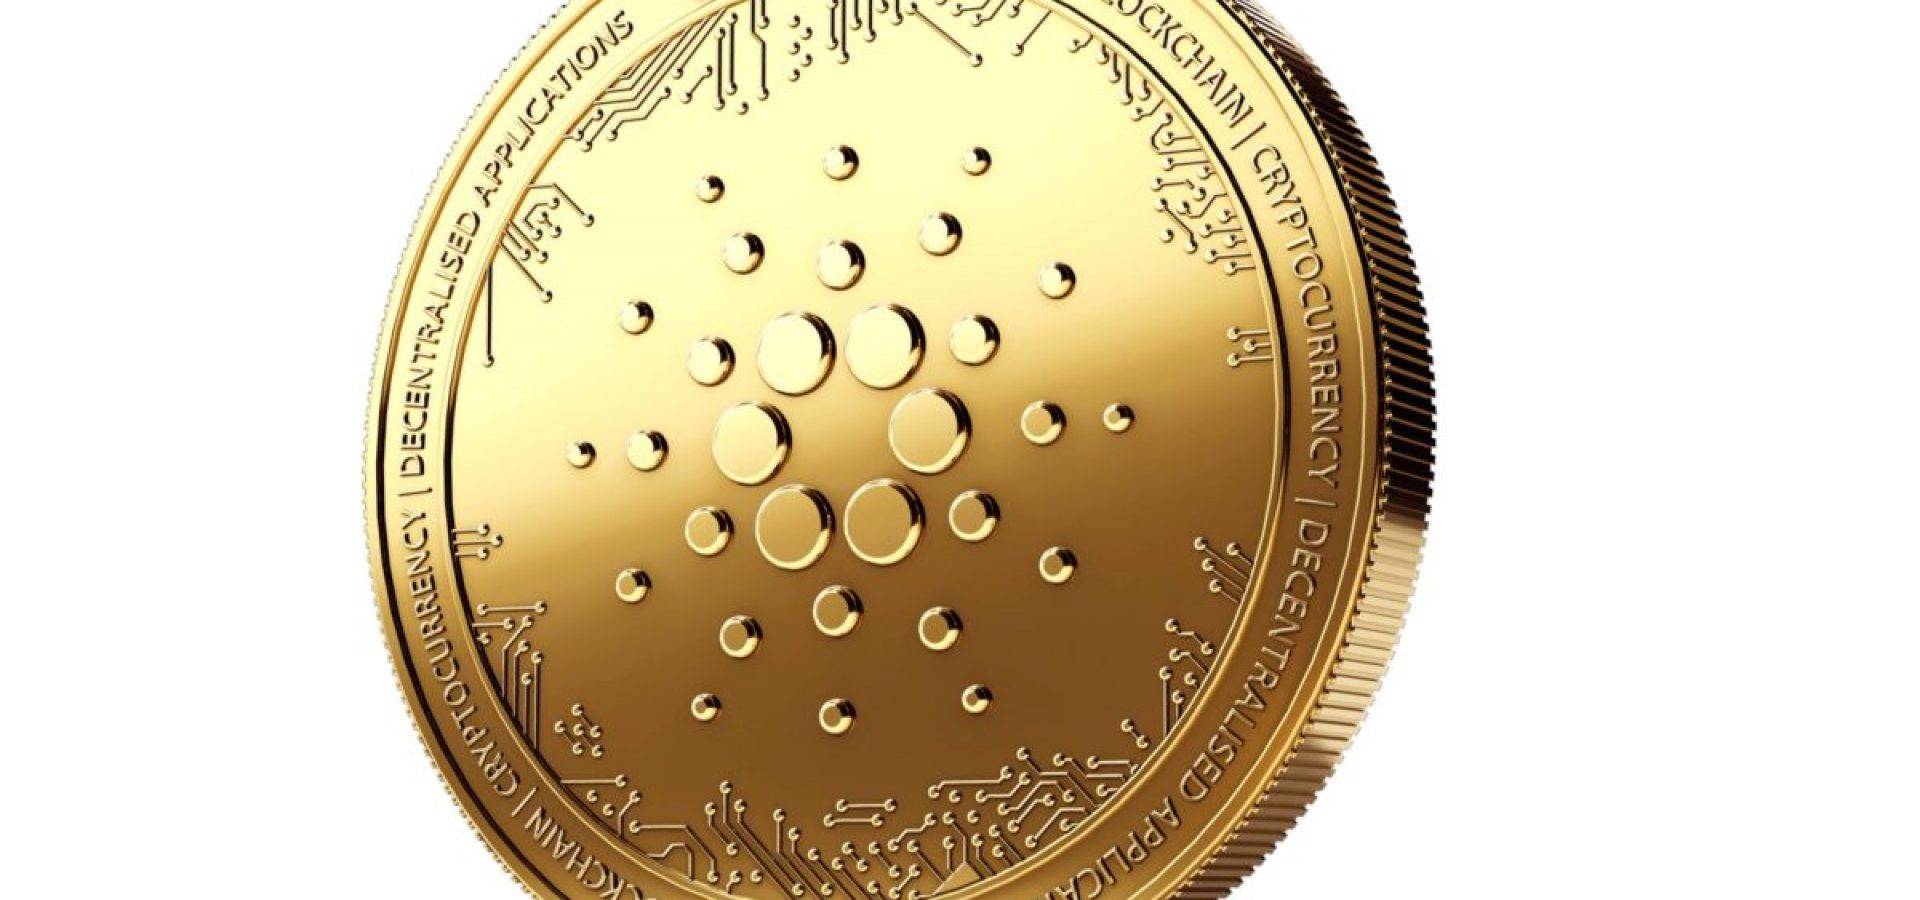 Cardano and its importance